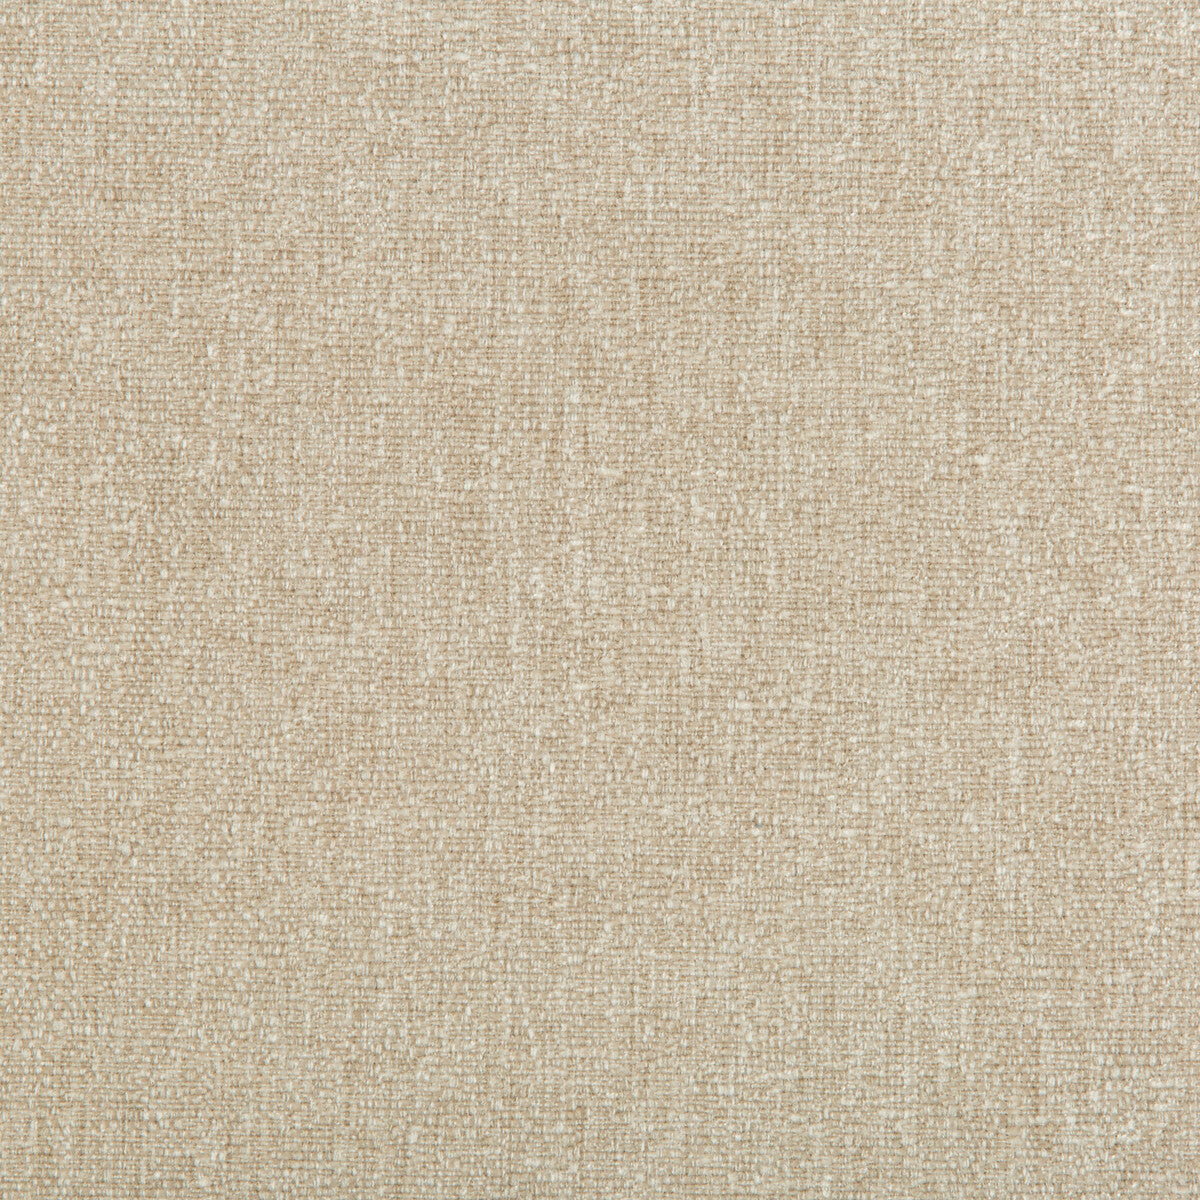 Kravet Contract fabric in 35405-16 color - pattern 35405.16.0 - by Kravet Contract in the Crypton Incase collection